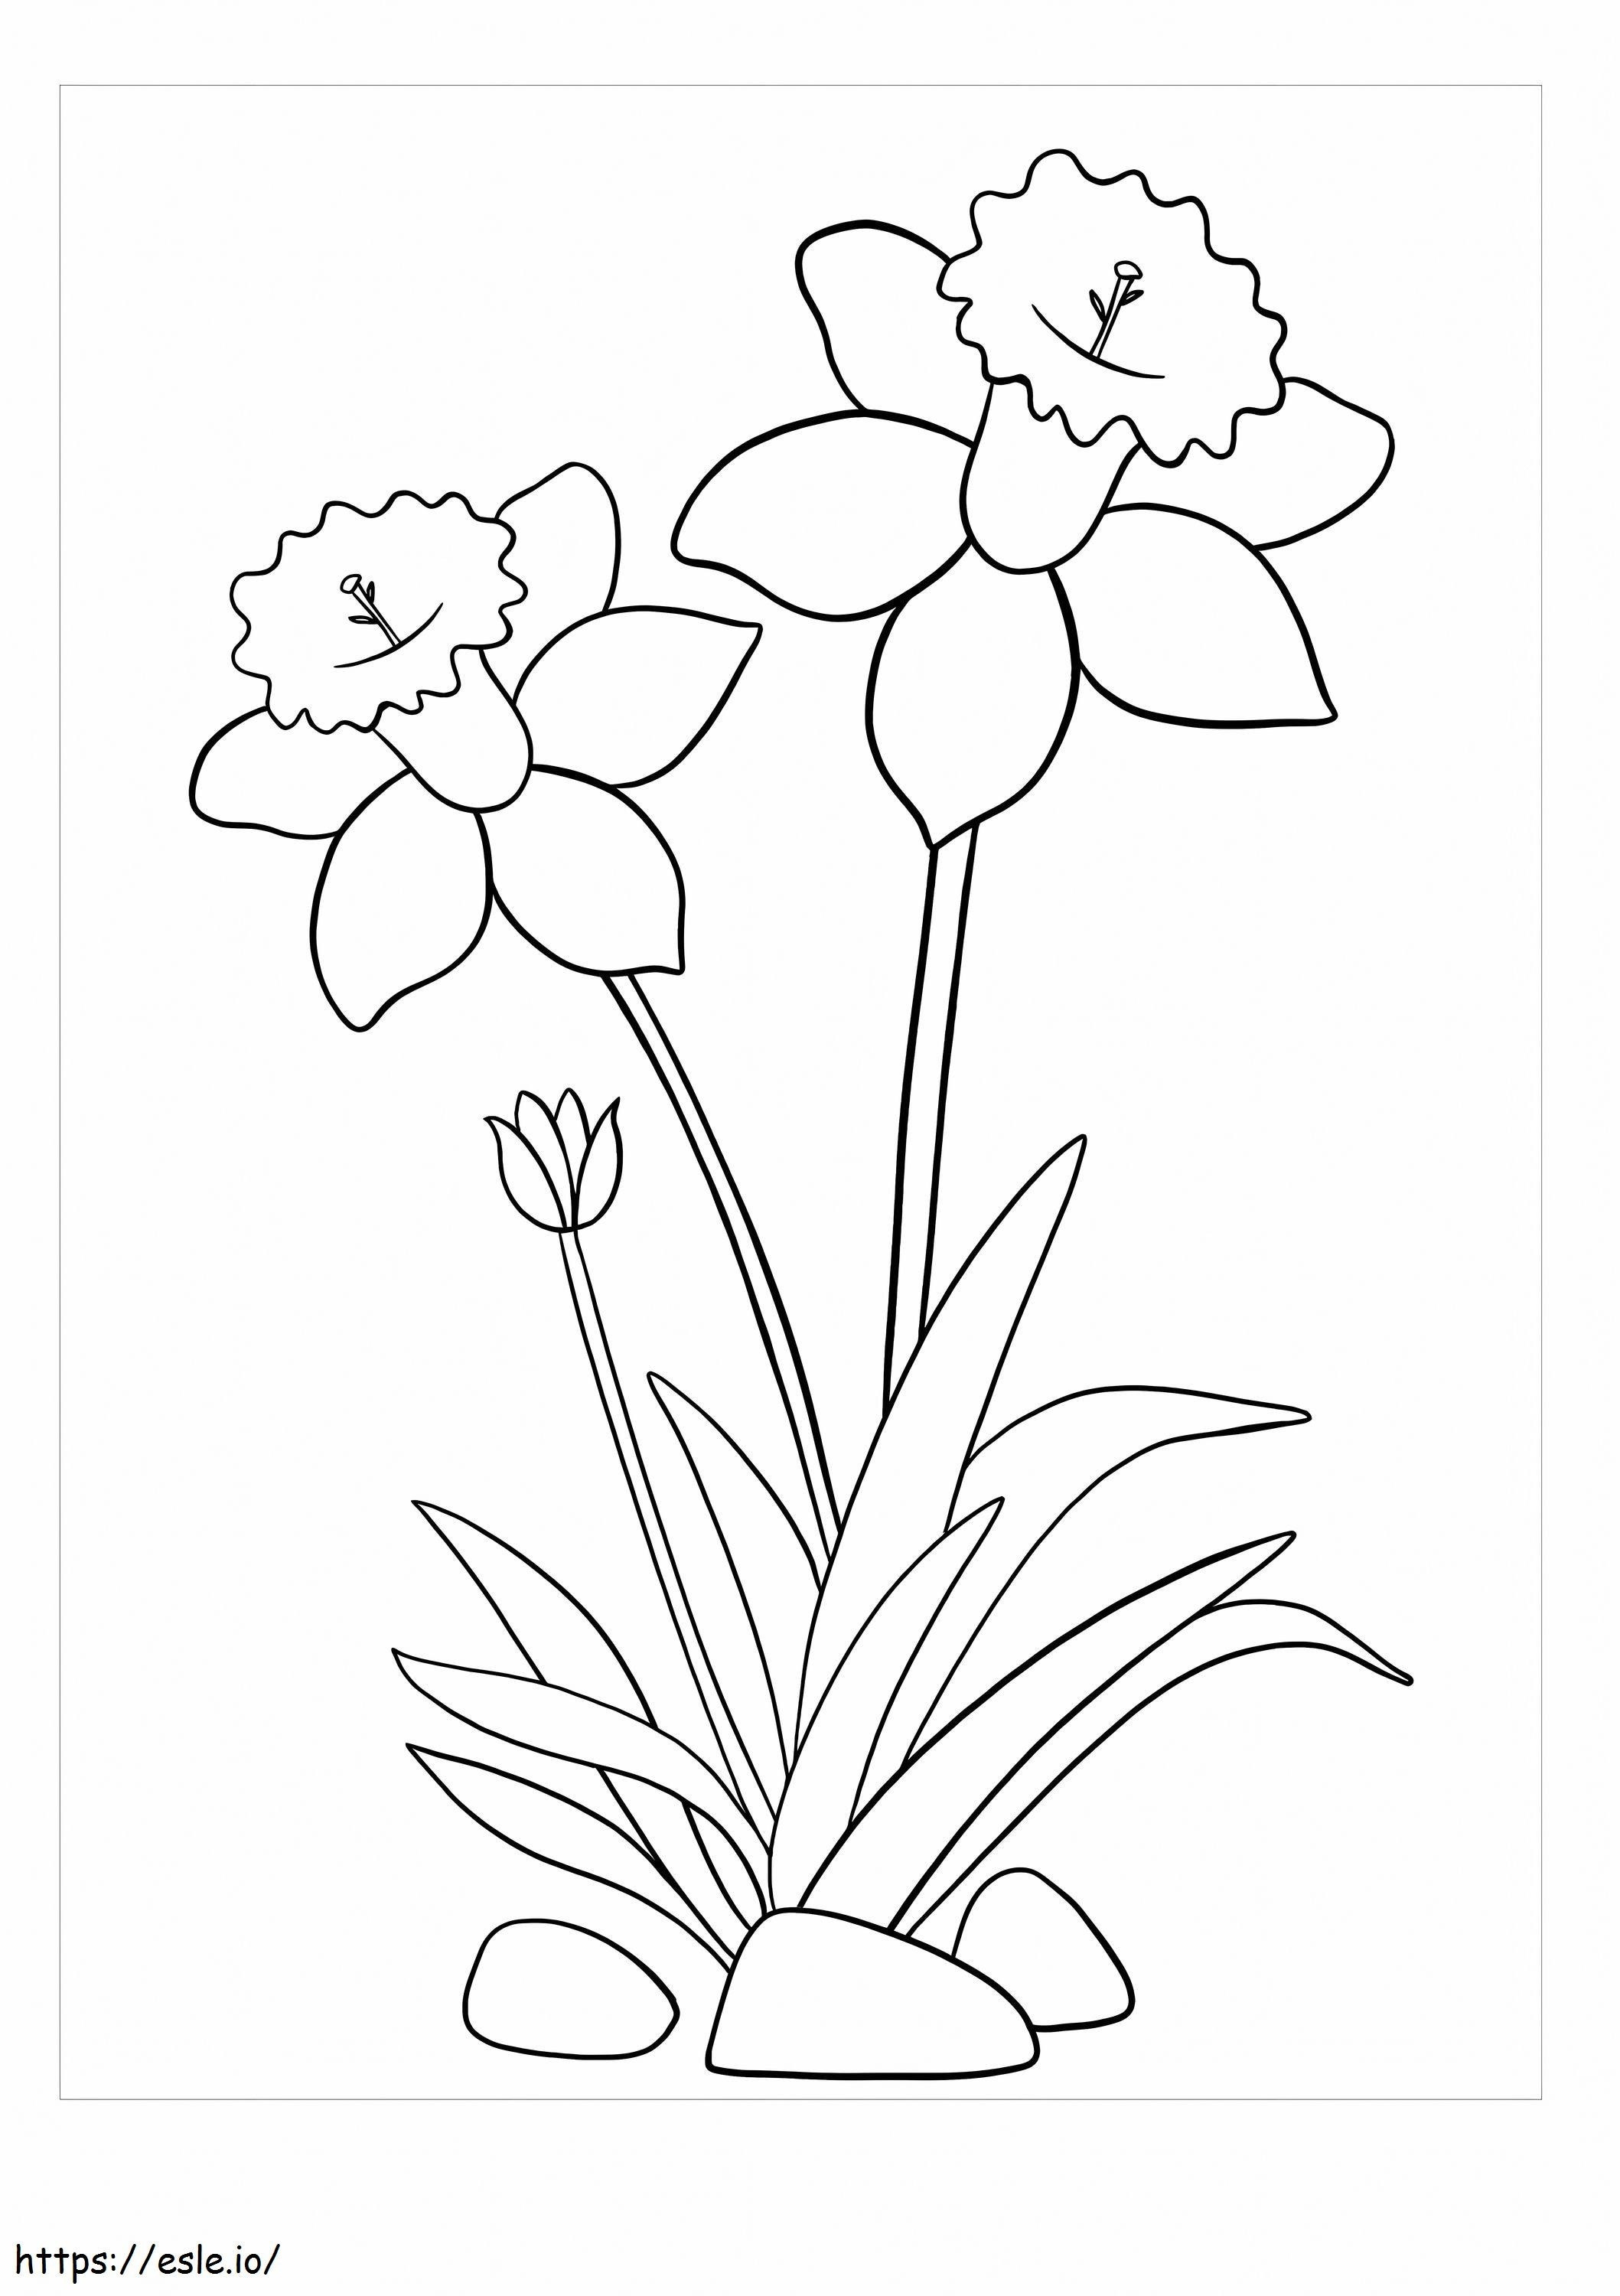 Two Daffodils And Rock coloring page